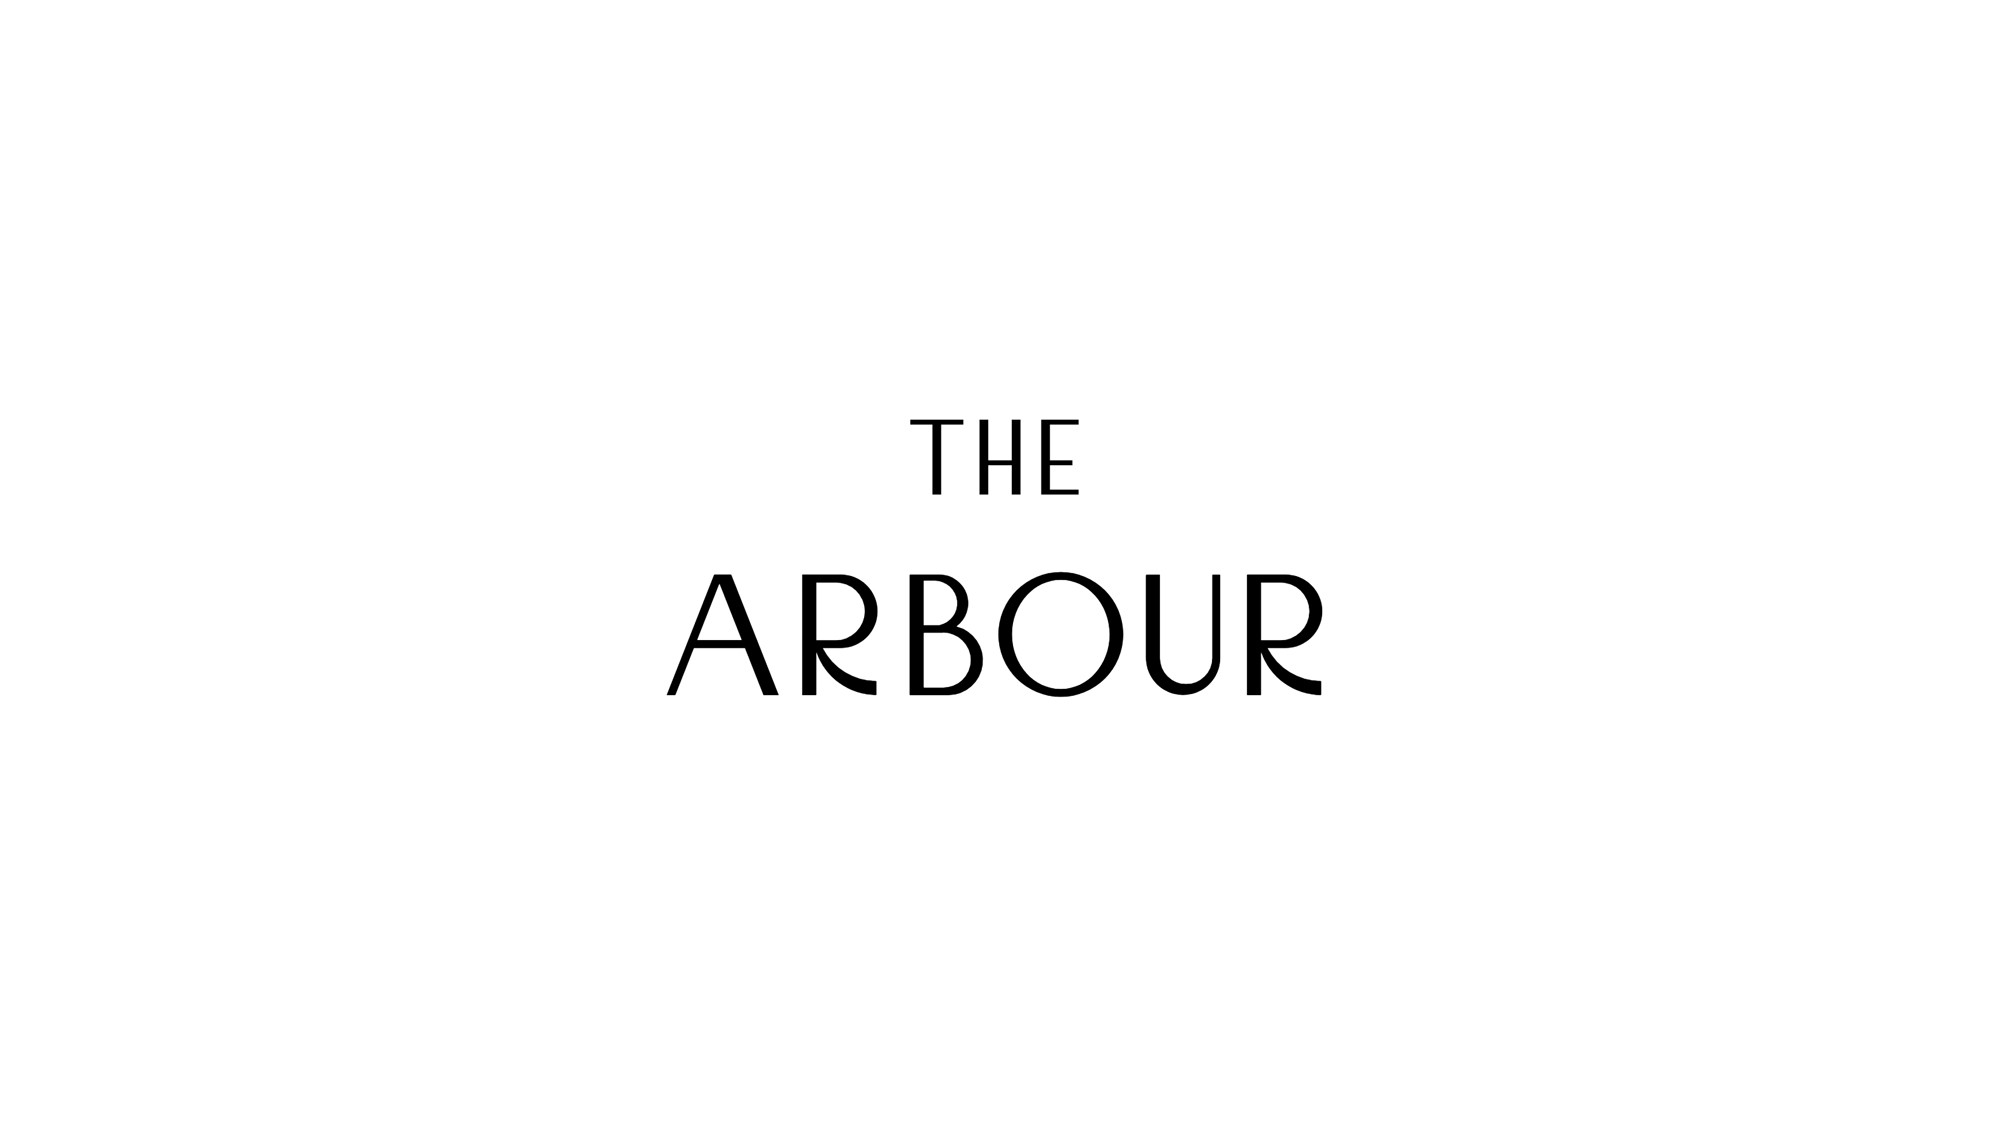 Logo of The Arbour development by GS8.